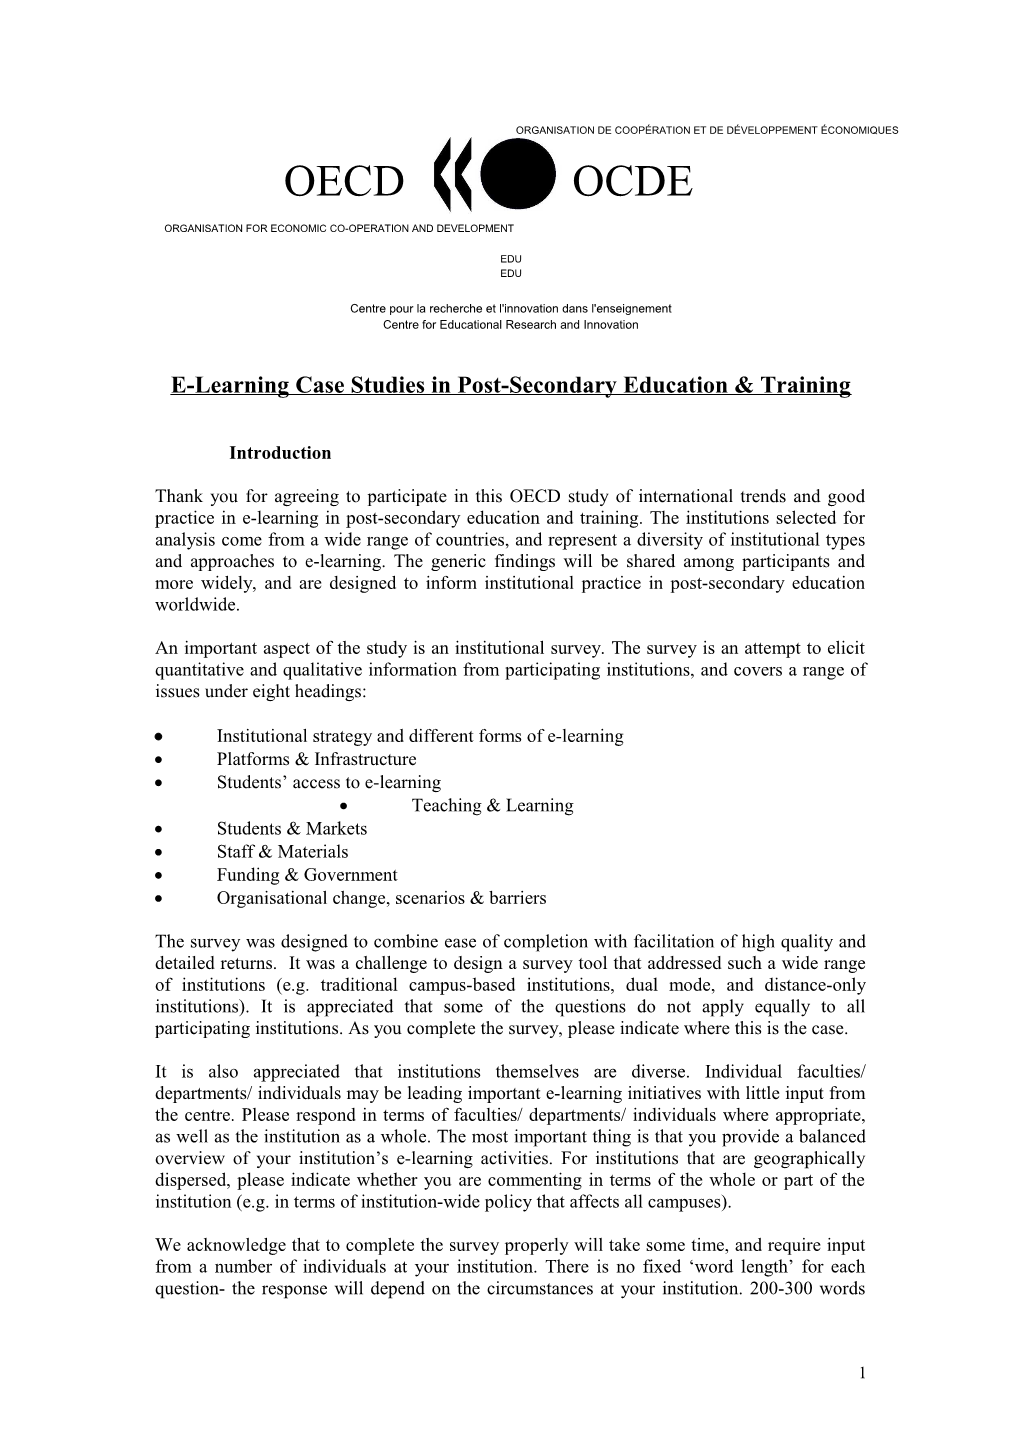 E-Learning Case Studies in Post-Secondary Education & Training